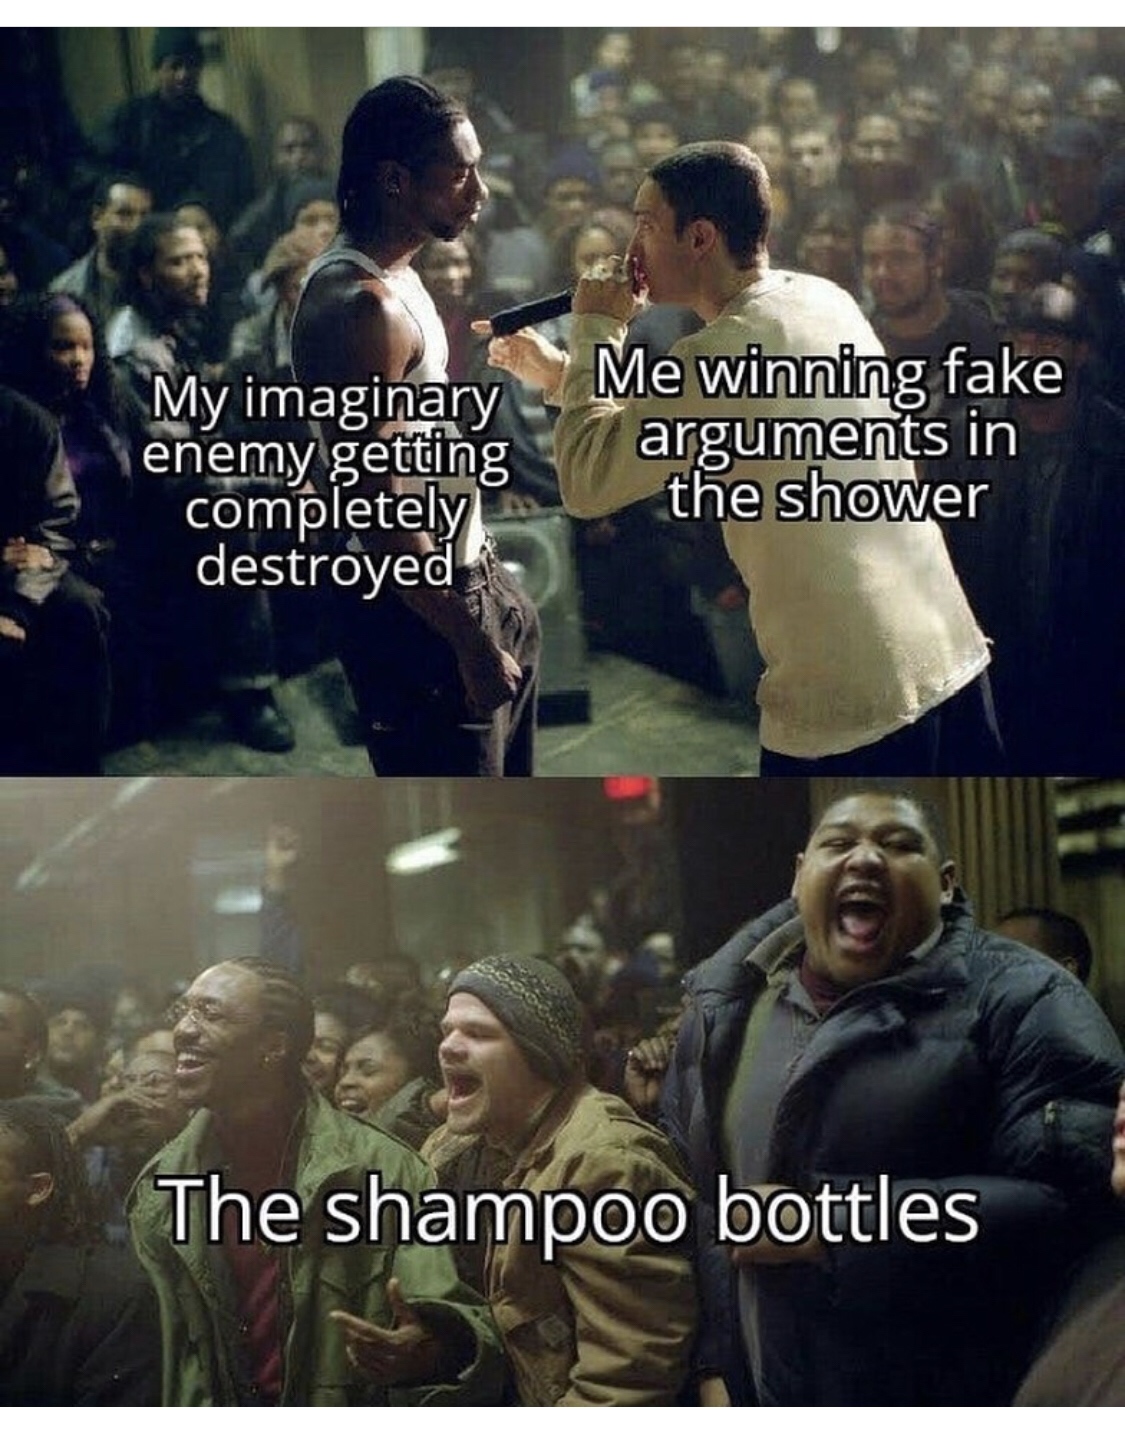 My imaginary enemy getting completely destroyed Me winning fake arguments in the shower The shampoo bottles